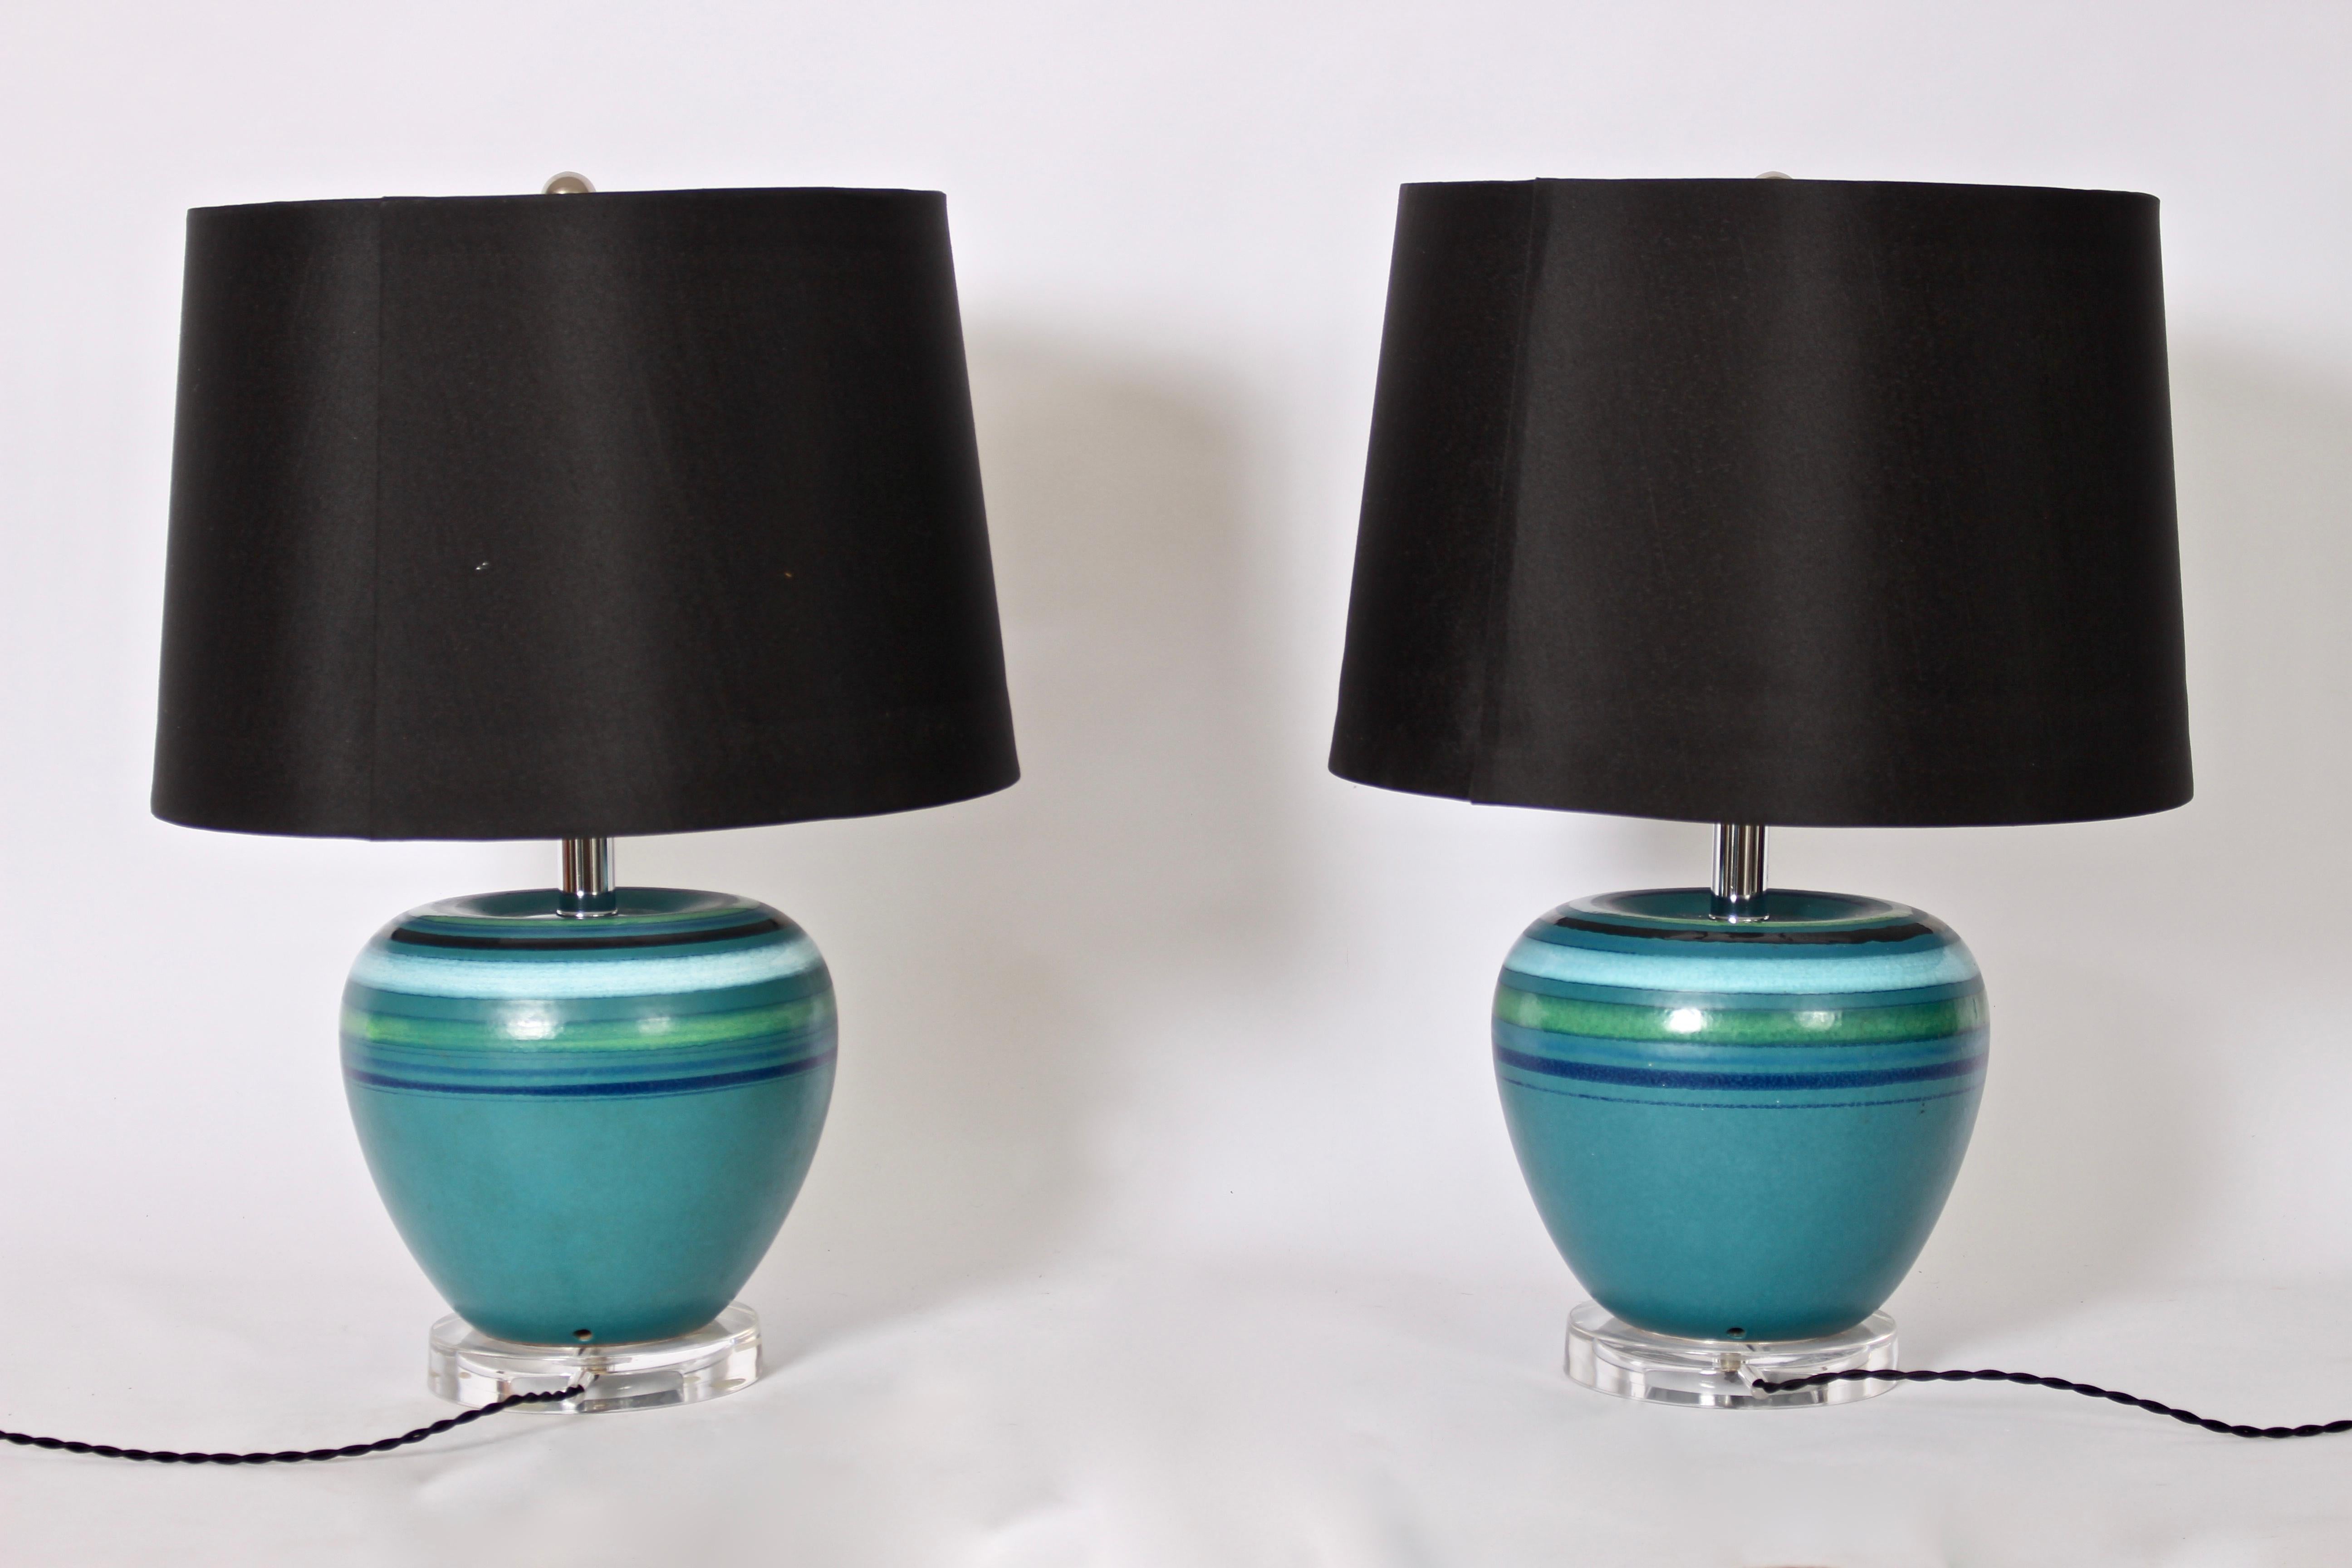 Italian Modern Bitossi attributed Rosenthal Netter blue colored striped bedside lamps, c. 1970. Featuring blue turquoise coloration with horizontal stripes in navy, green, aqua and black on round clear Lucite bases. Black Shades shown for display